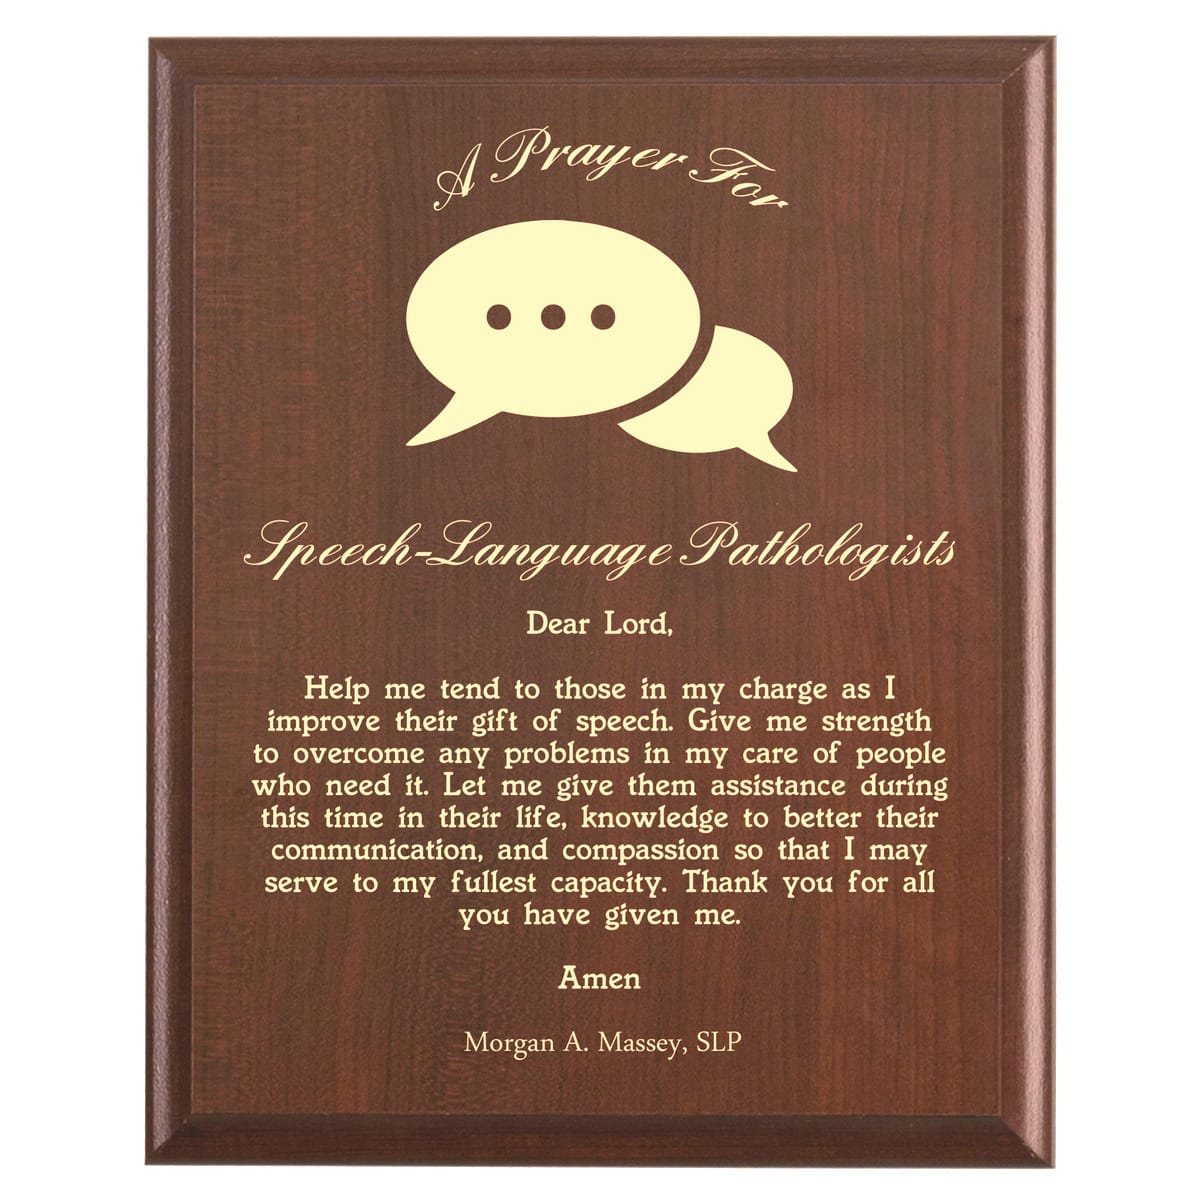 Plaque photo: Speech Language Pathologist Prayer Plaque design with free personalization. Wood style finish with customized text.